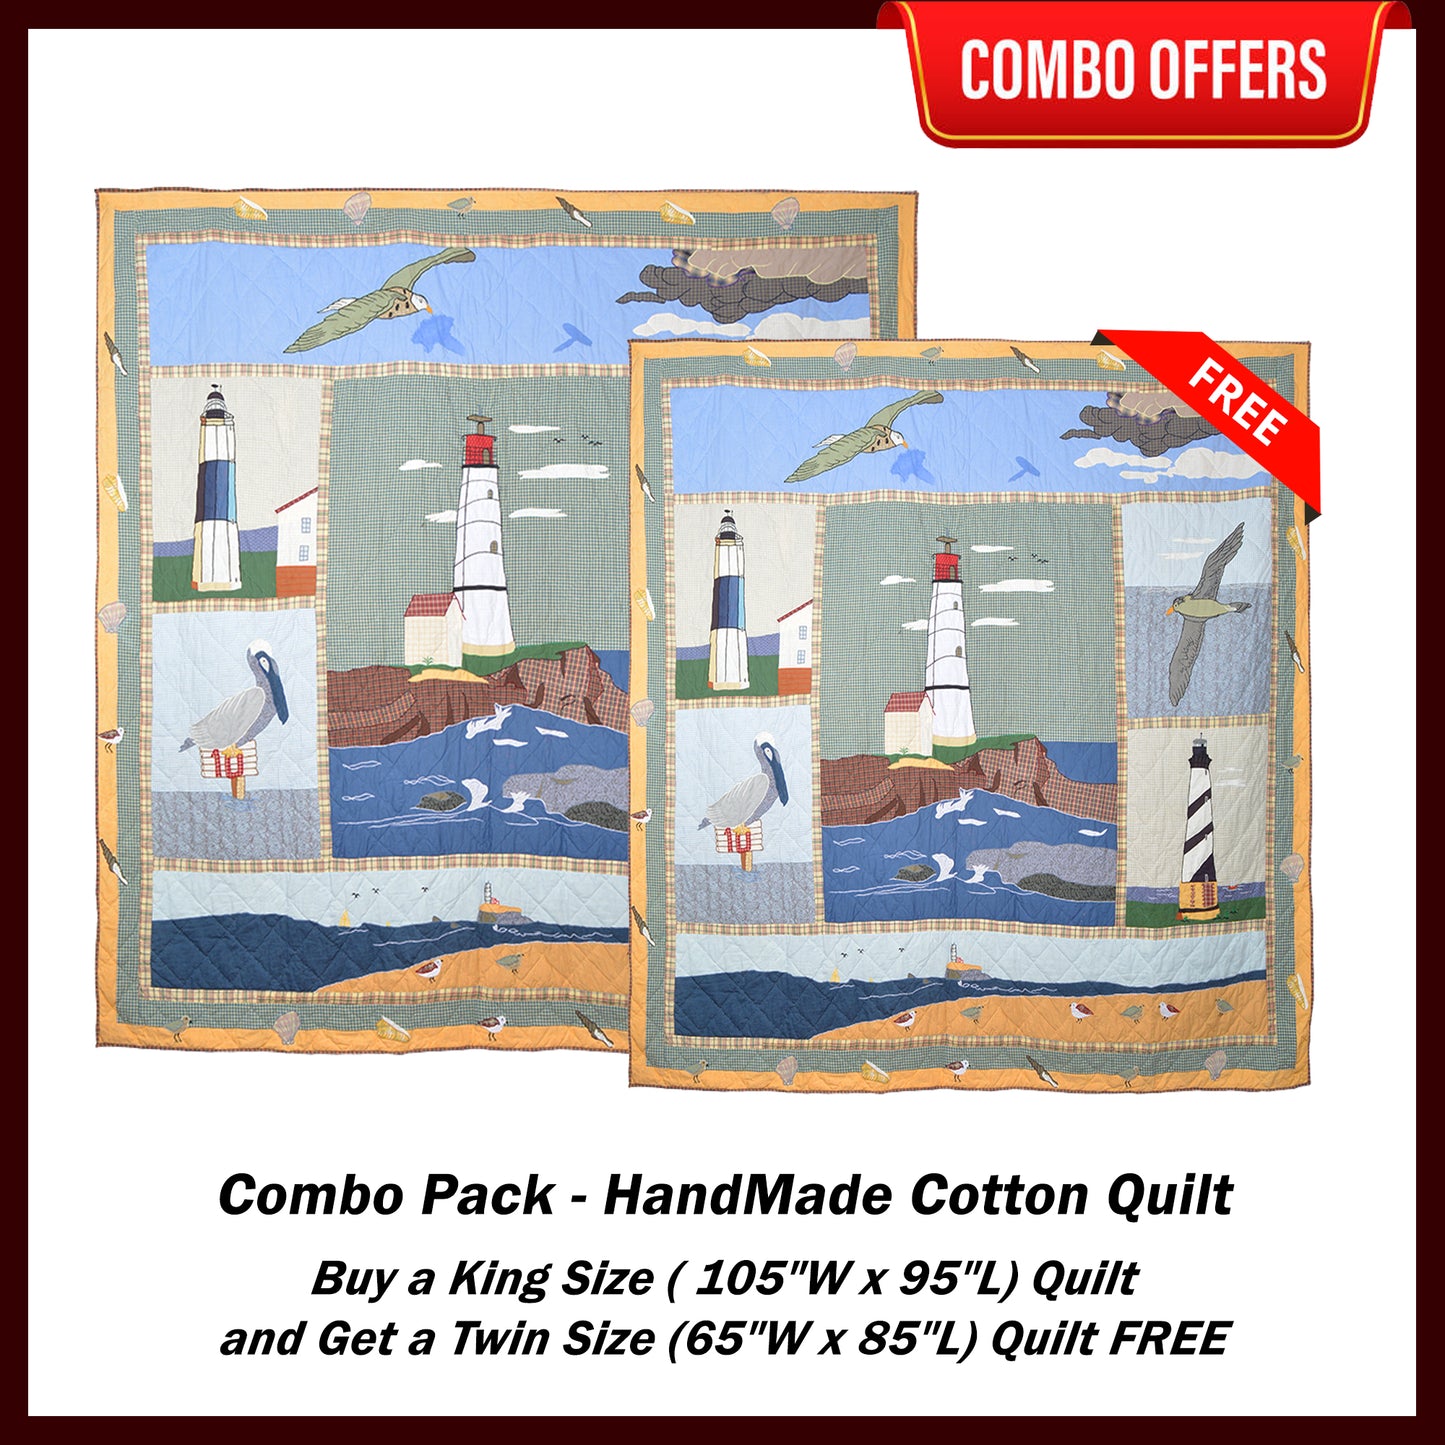 Light House By The Bay Handmade Cotton Quilt - Buy a King Size Quilt and Get a Twin Size Quilt FREE